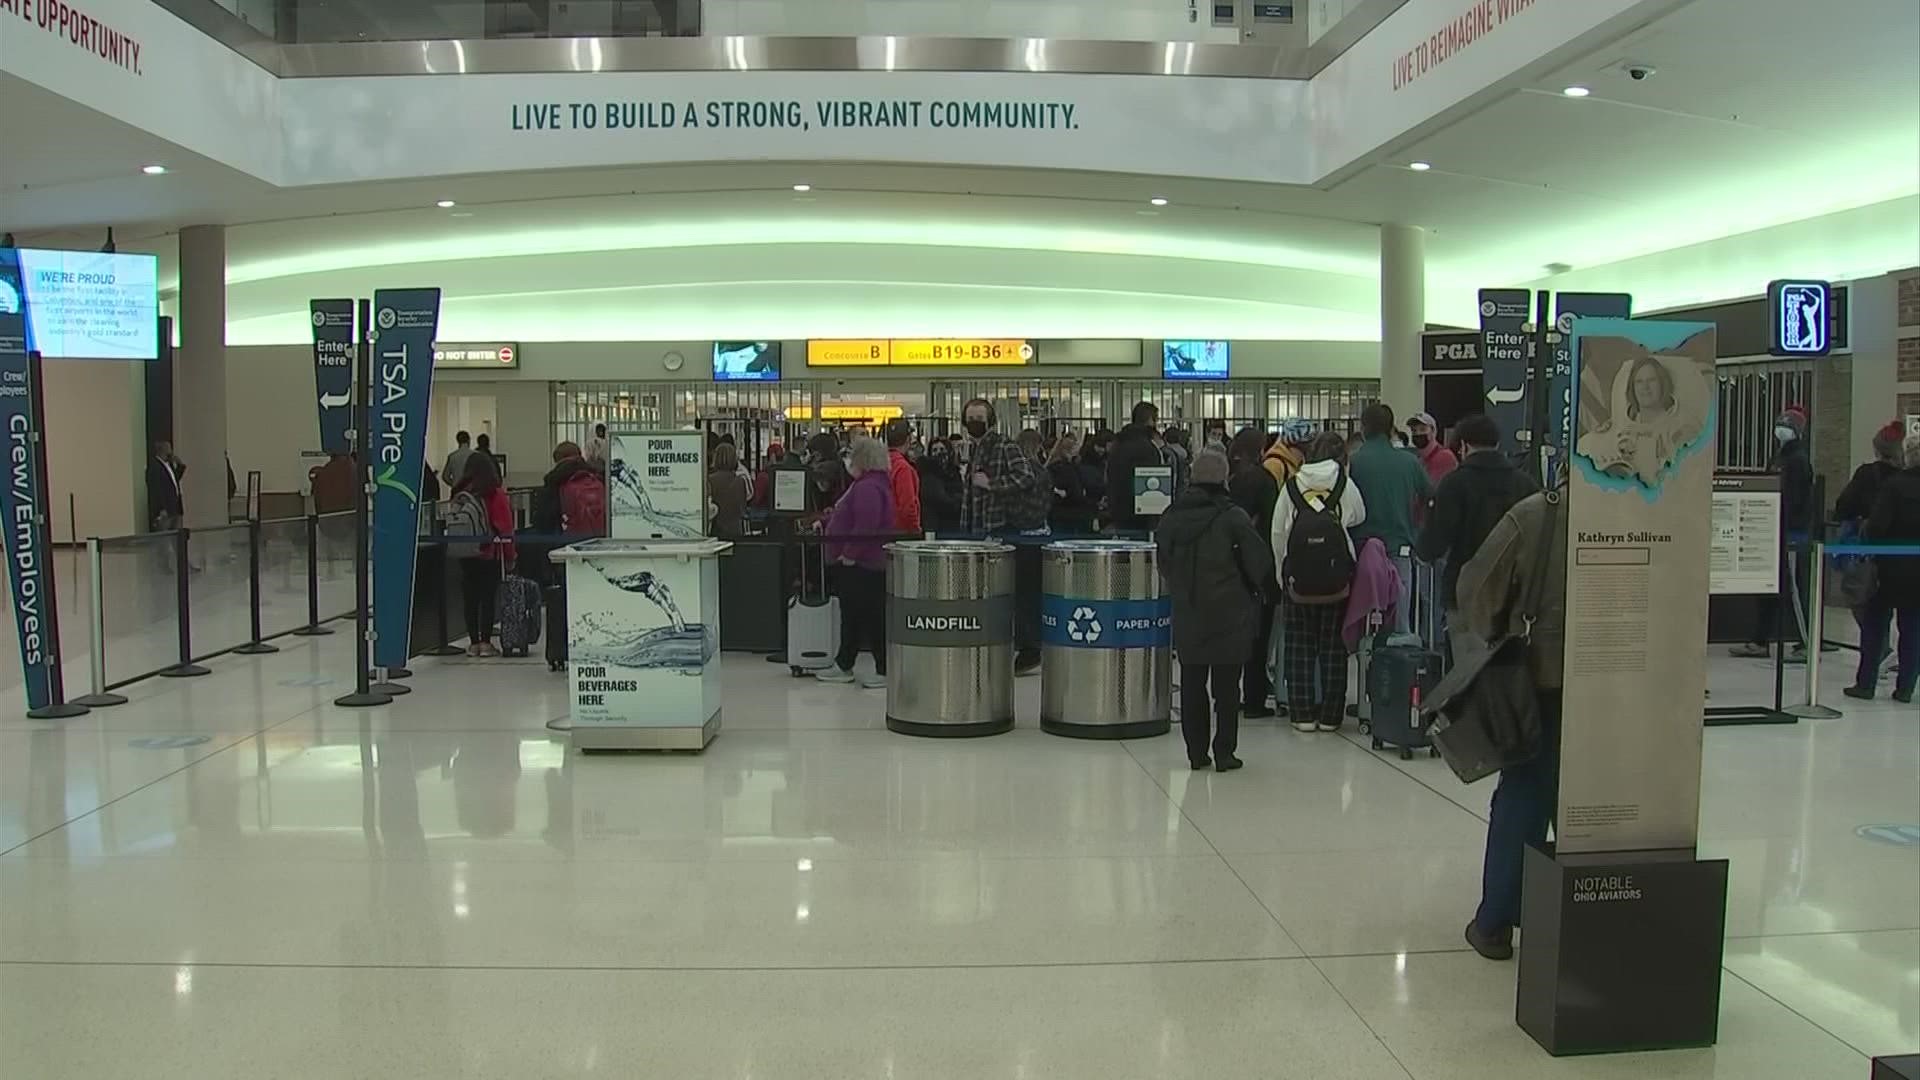 Between Nov. 23 and Nov. 29, roughly 155,500 people are scheduled to travel from the Columbus airport.